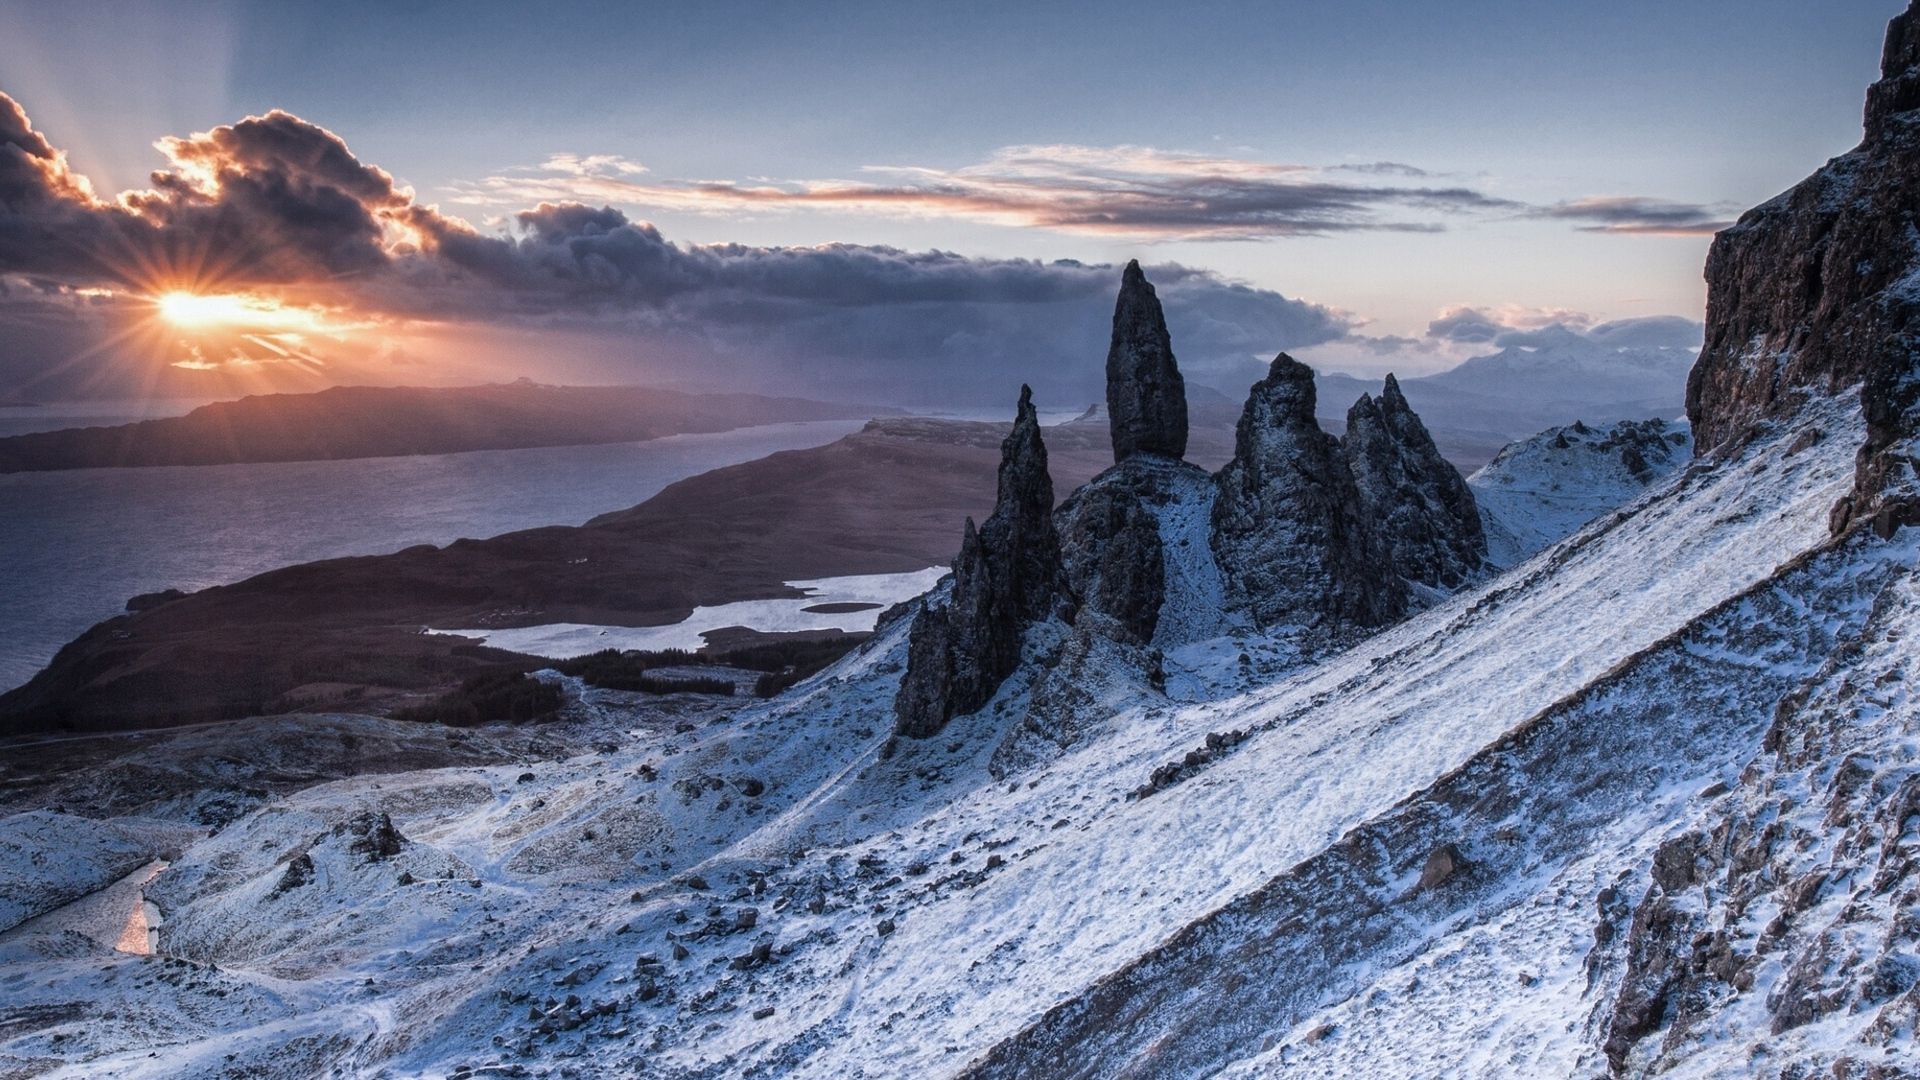 HD Scotland Wallpaper and Photo. View High Definition Wallpaper